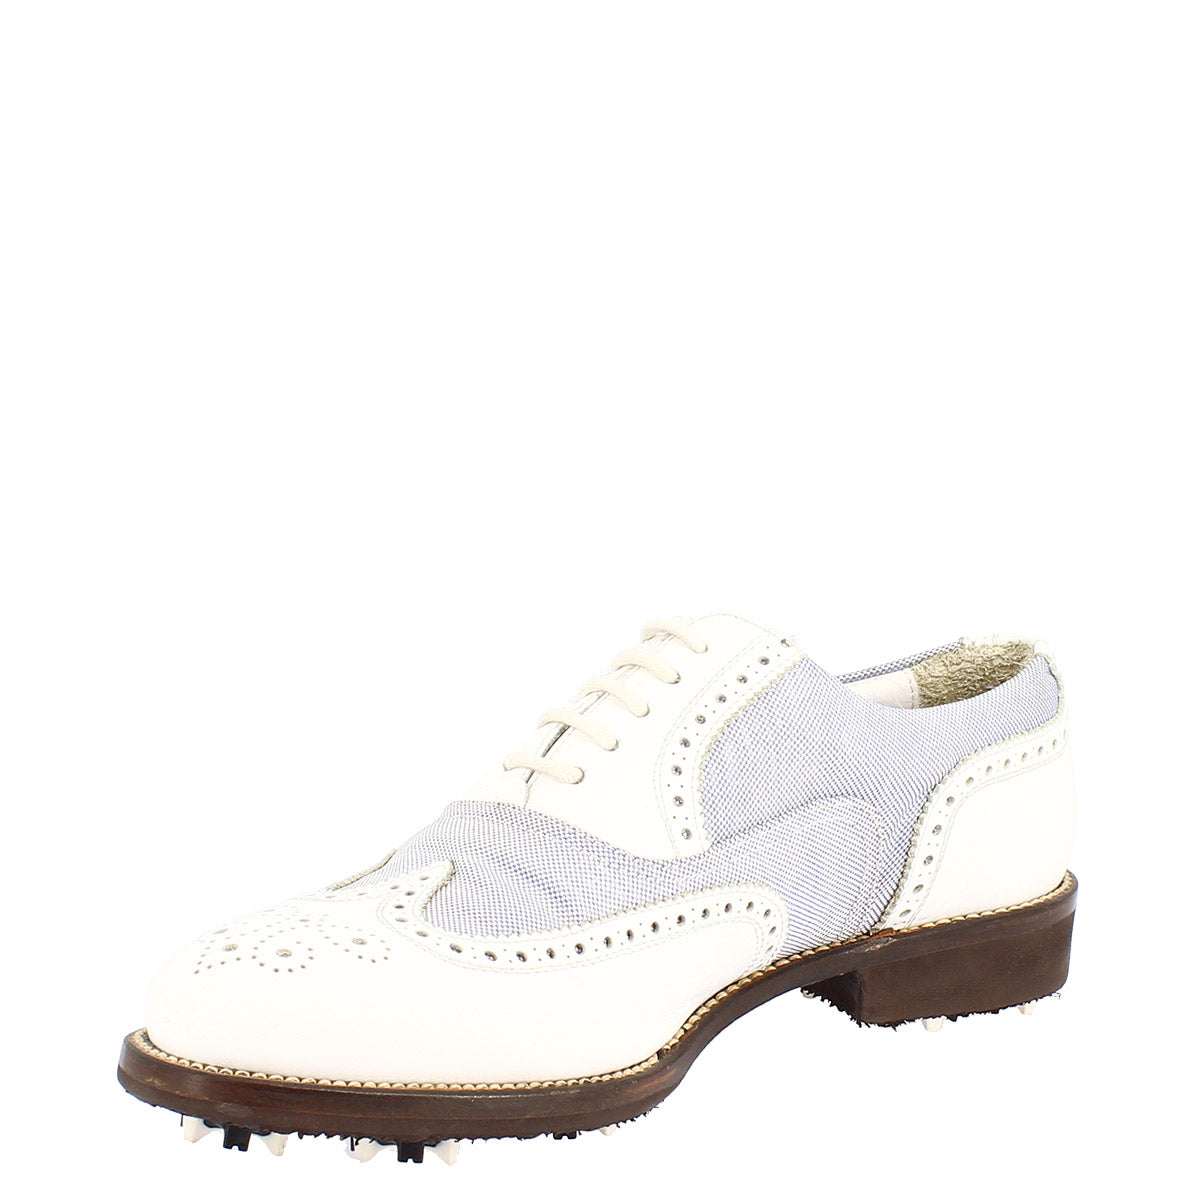 Handmade white leather and fabric women's summer golf shoes